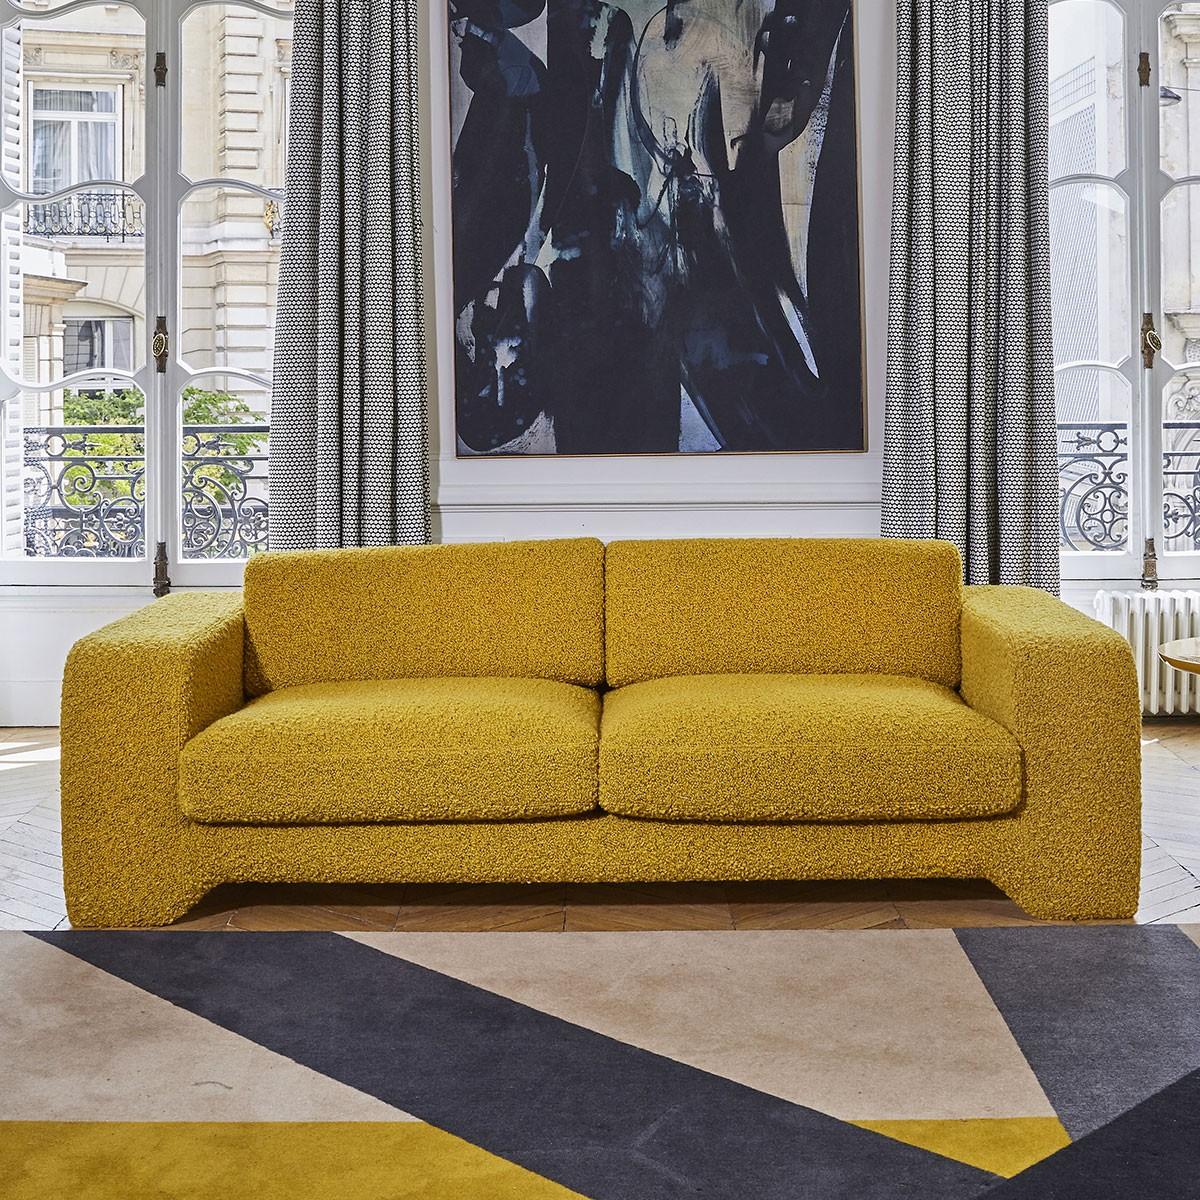 Popus Editions Giovanna 2.5 Seater Sofa in Almond Green Como Velvet Upholstery

Giovanna is a sofa with a strong profile. A sober, plush line, with this famous detail that changes everything, so as not to forget its strength of character and this